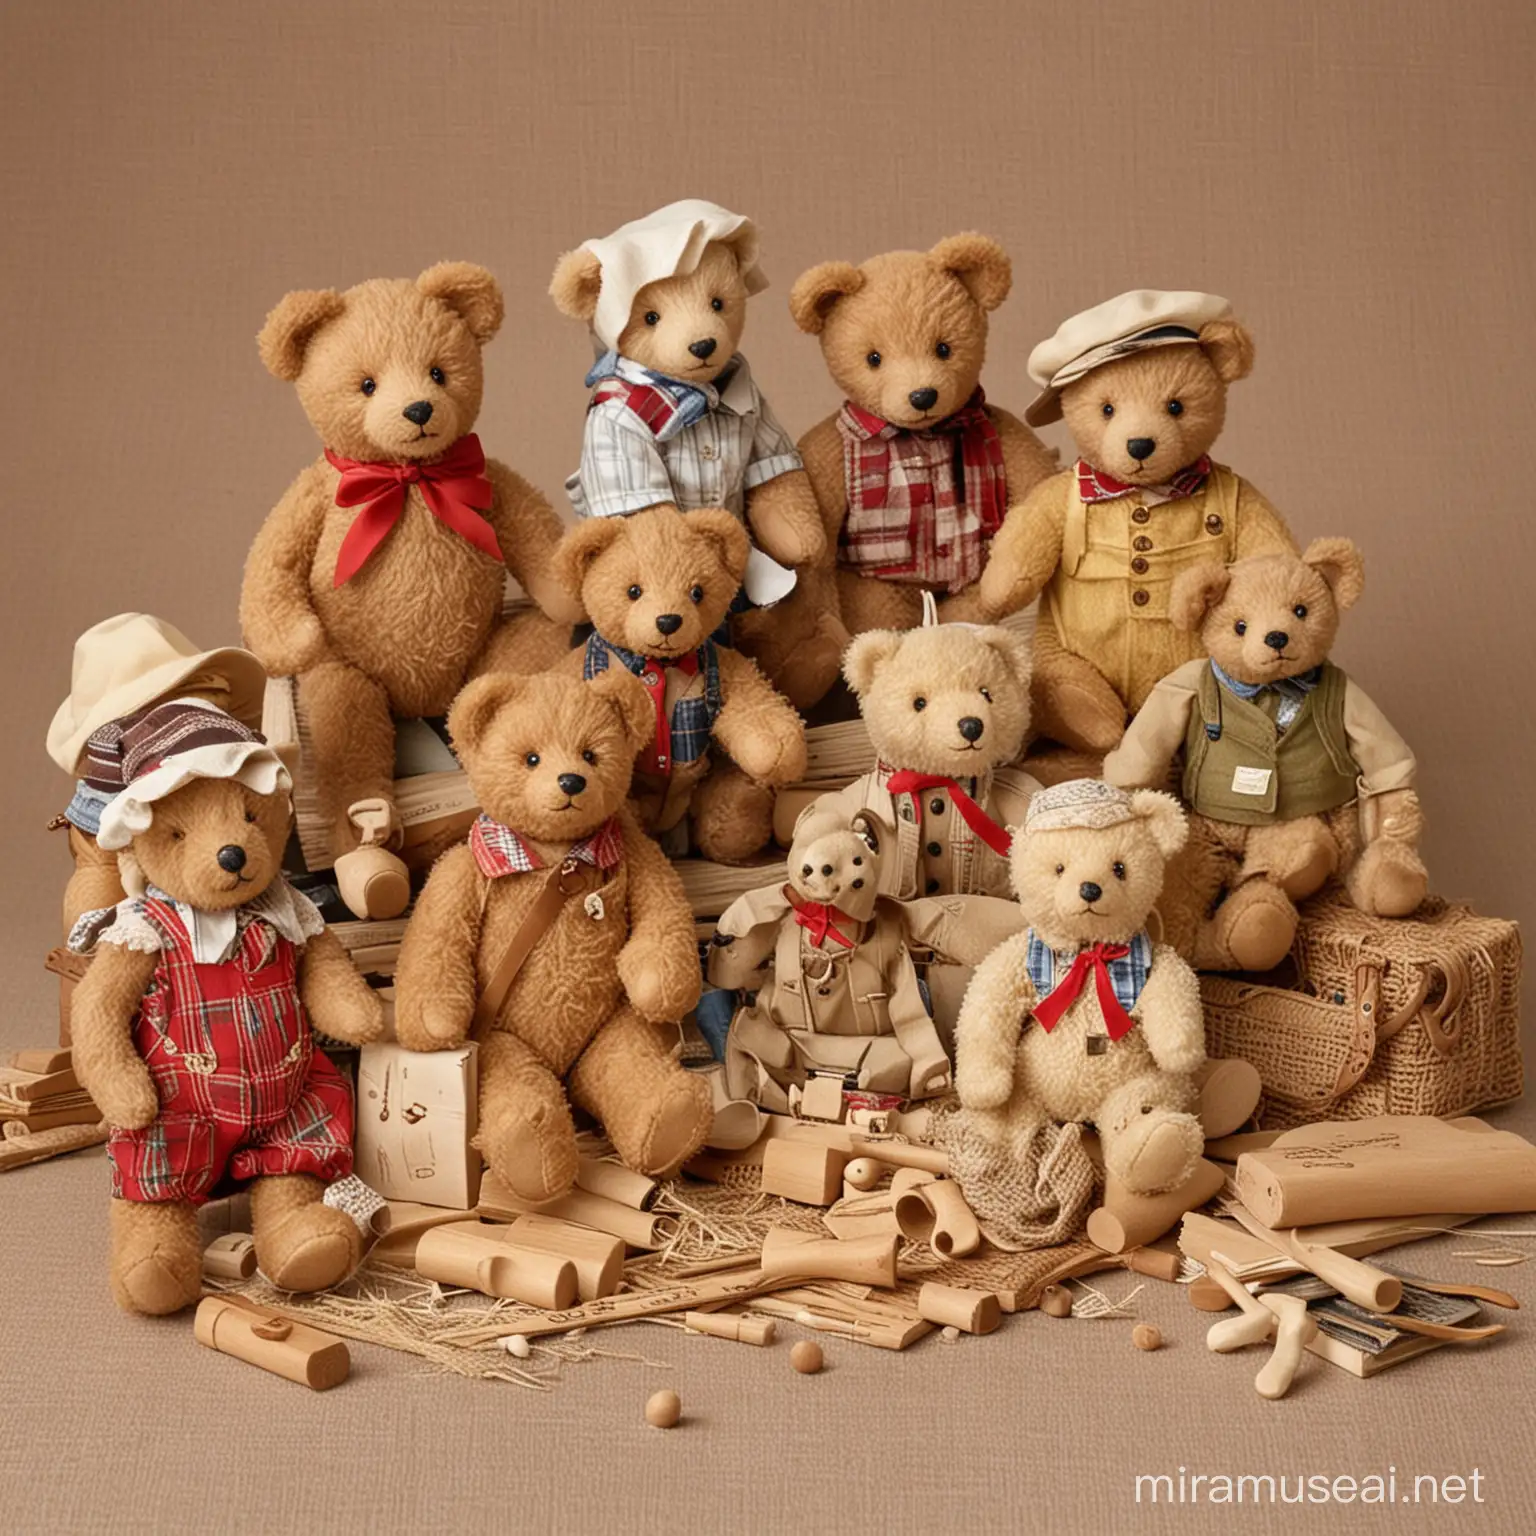 Collectible Teddy Bear Course Filled with Sawdust Clothing and Accessories